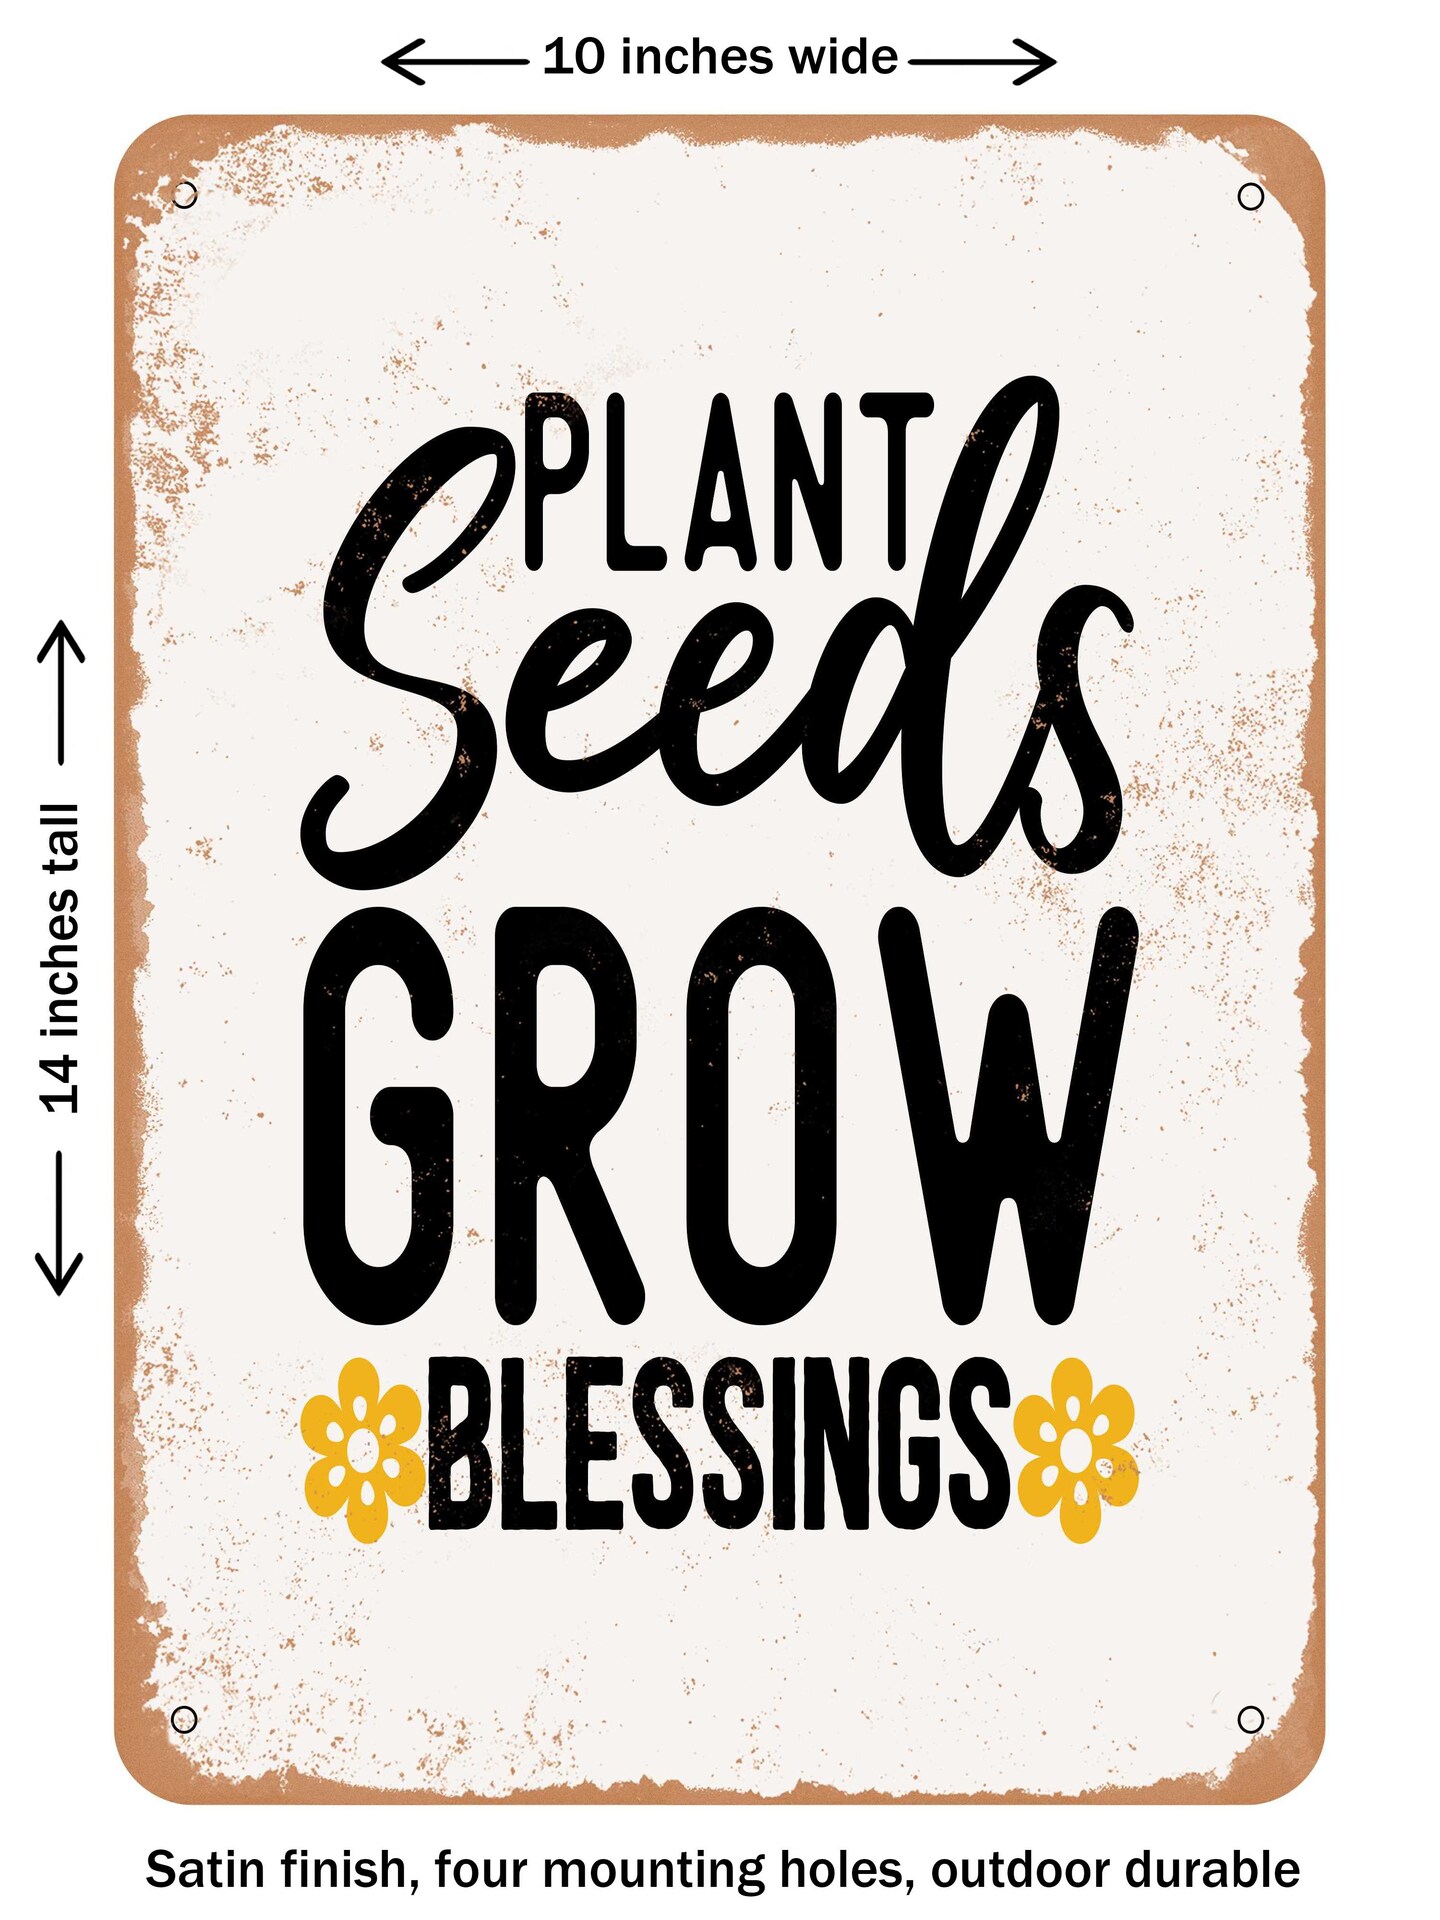 DECORATIVE METAL SIGN - Plant Seeds Grow Blessings - Vintage Rusty Look